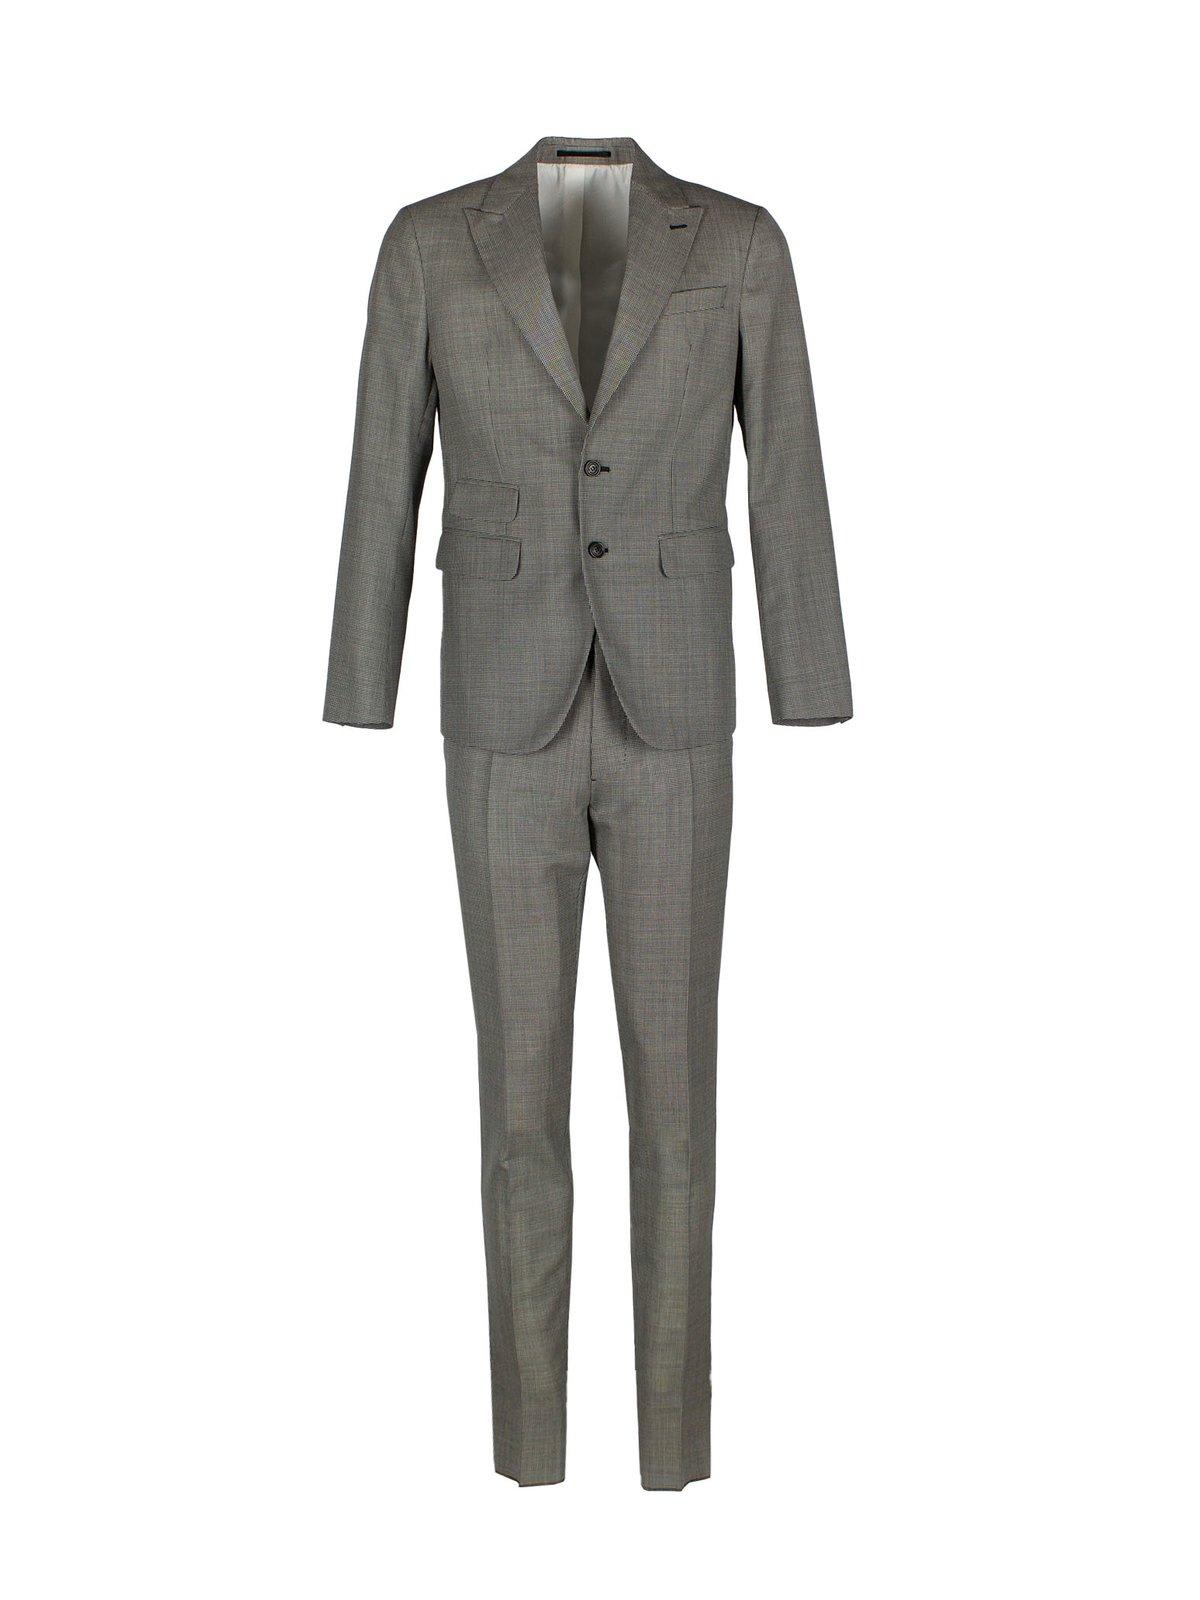 DSQUARED2 HOUNDSTOOTH PATTERNED TAILORED SUIT